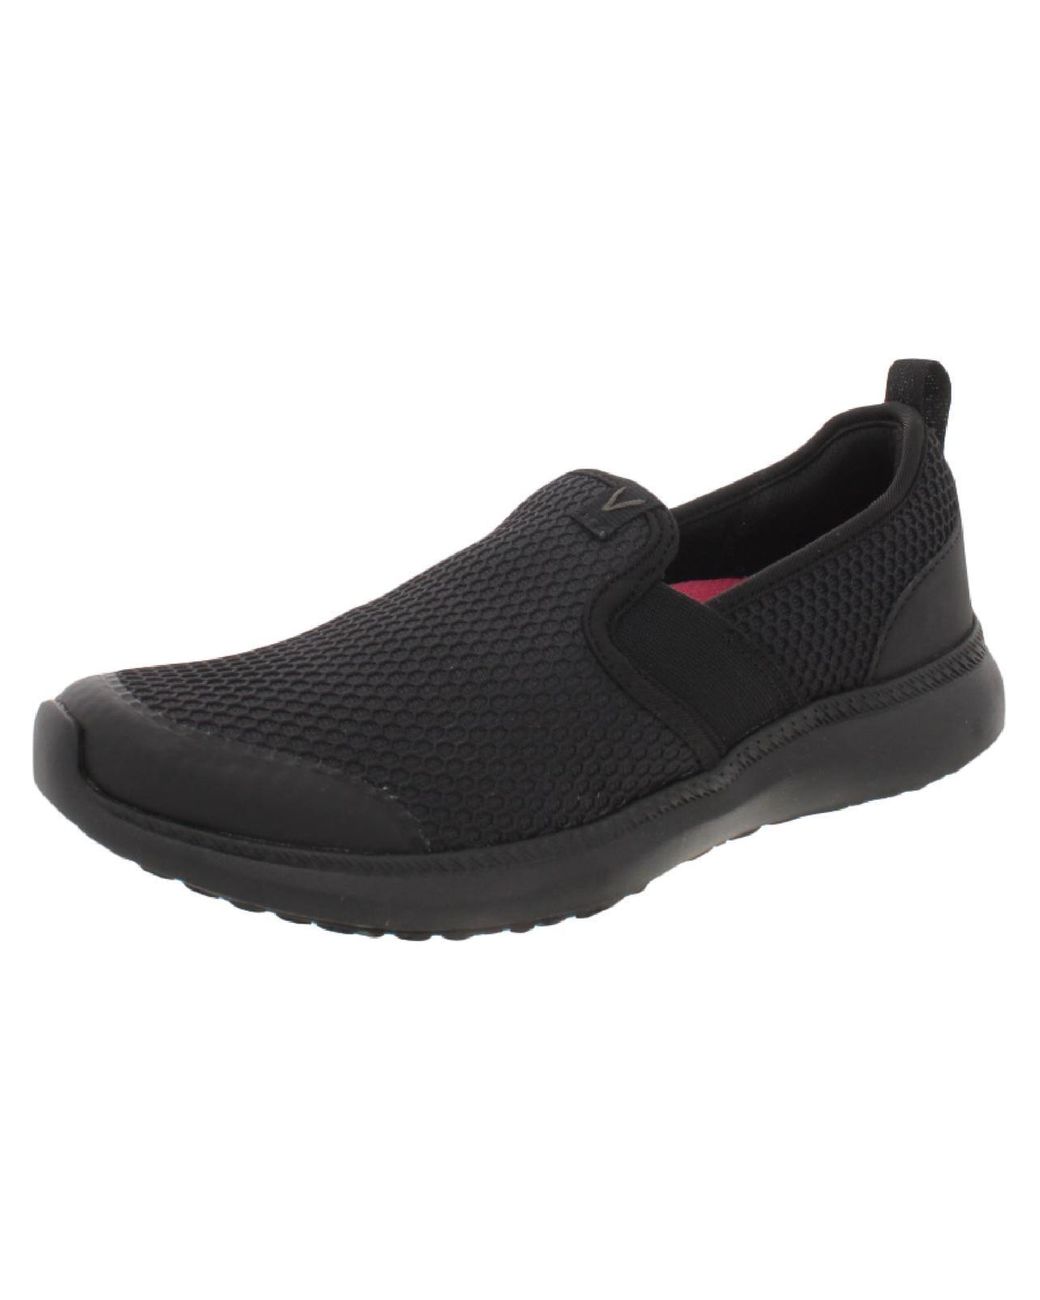 Vionic Julianna Workout Exercise Slip-on Sneakers in Black | Lyst